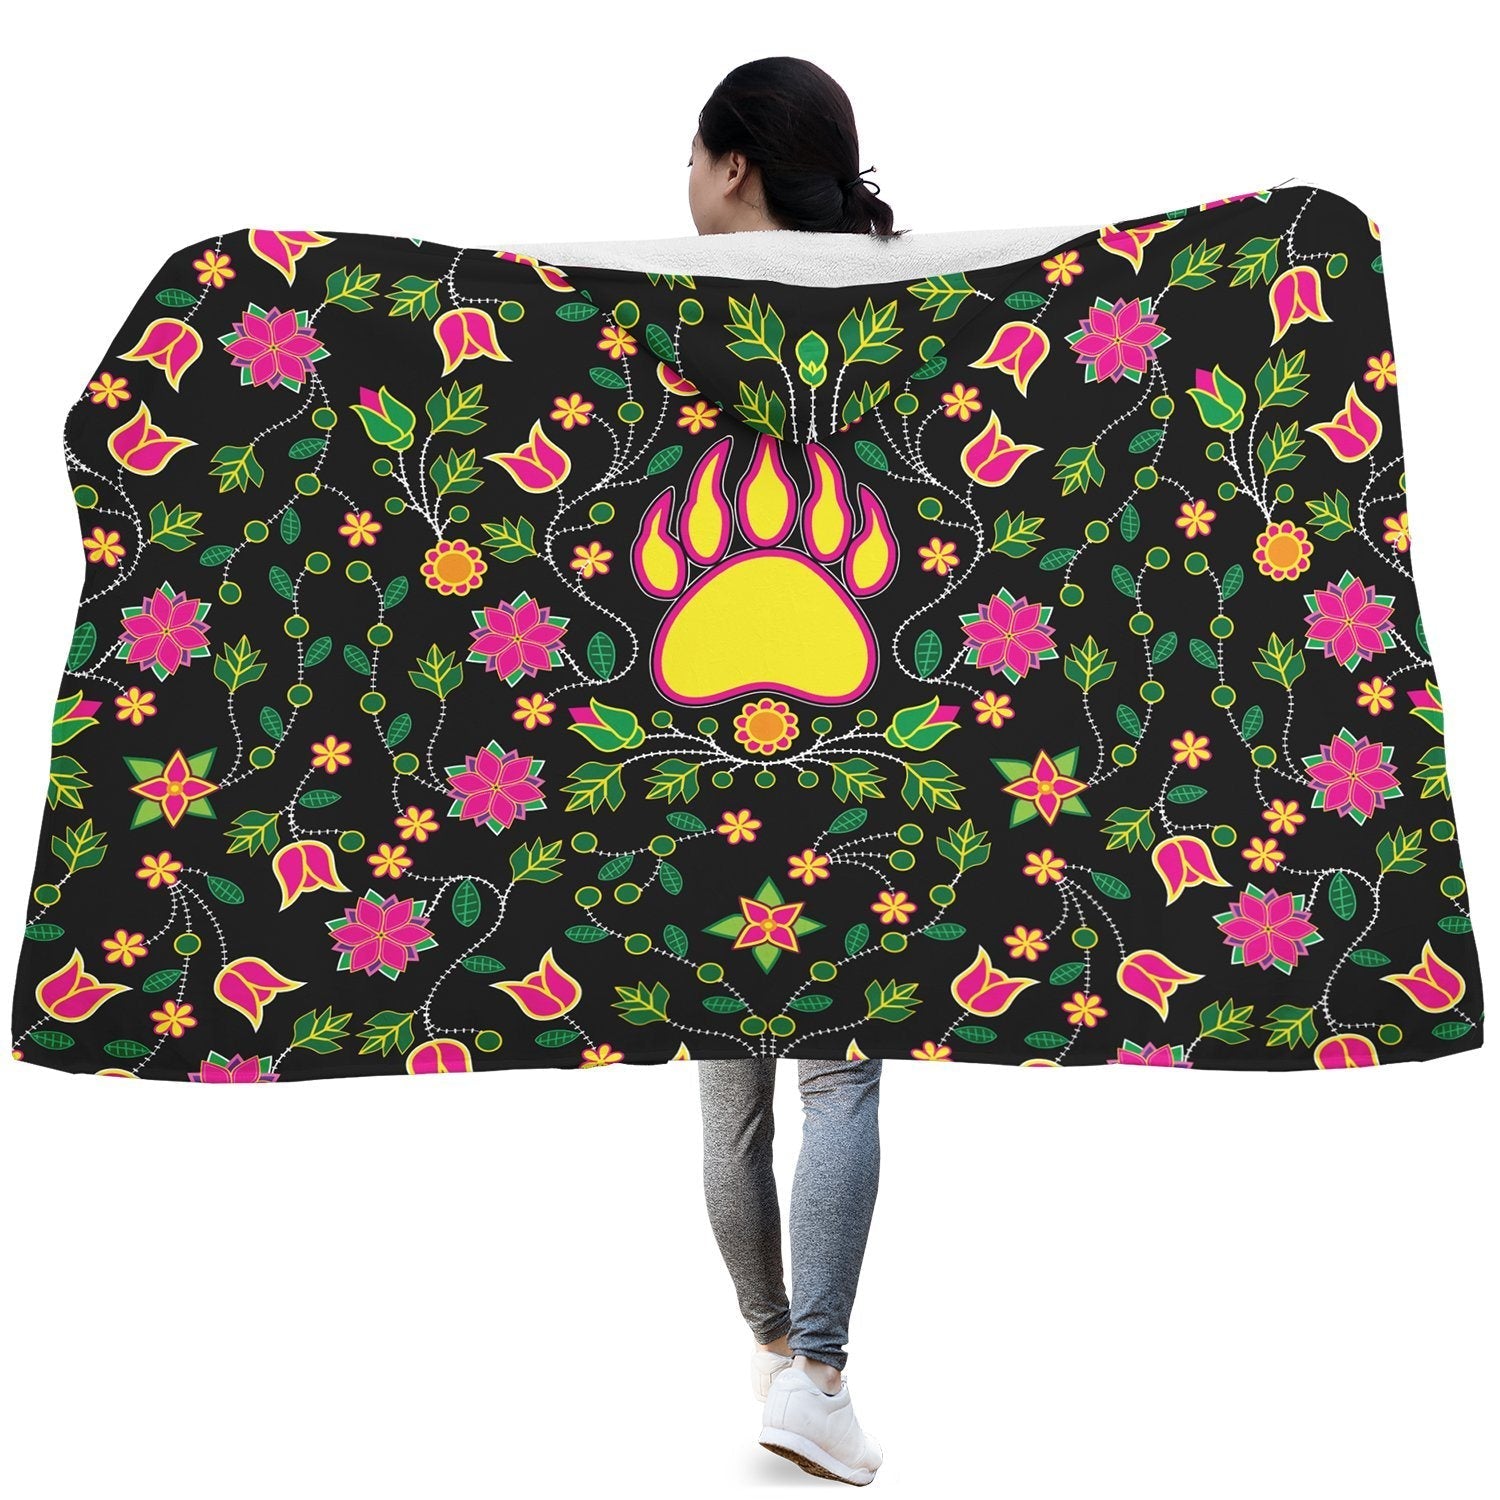 Floral Bearpaw Pink and Yellow Hooded Blanket blanket 49 Dzine 